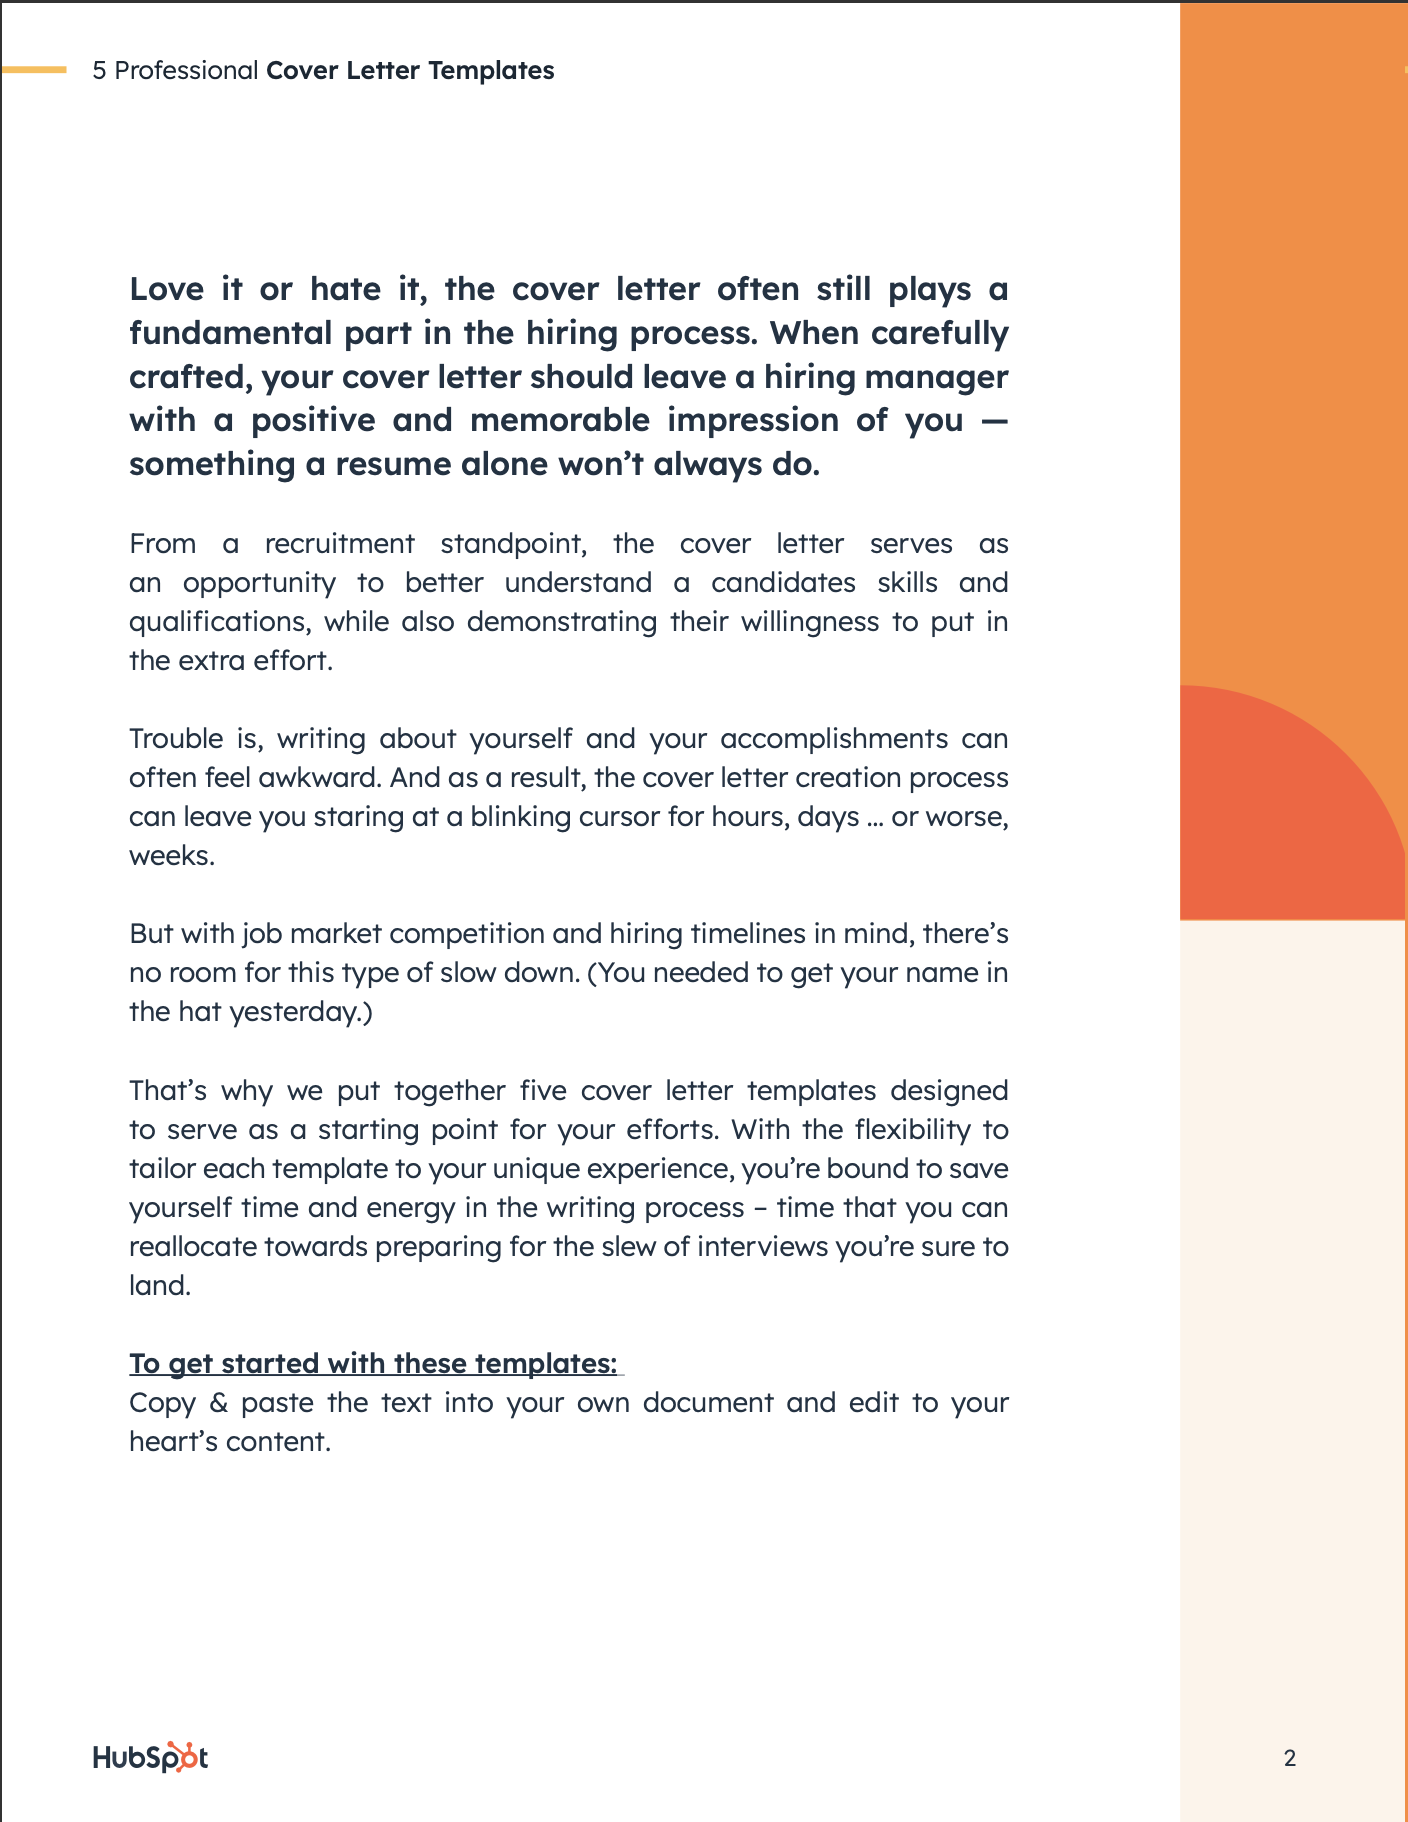 Cover Letter Templates - 4